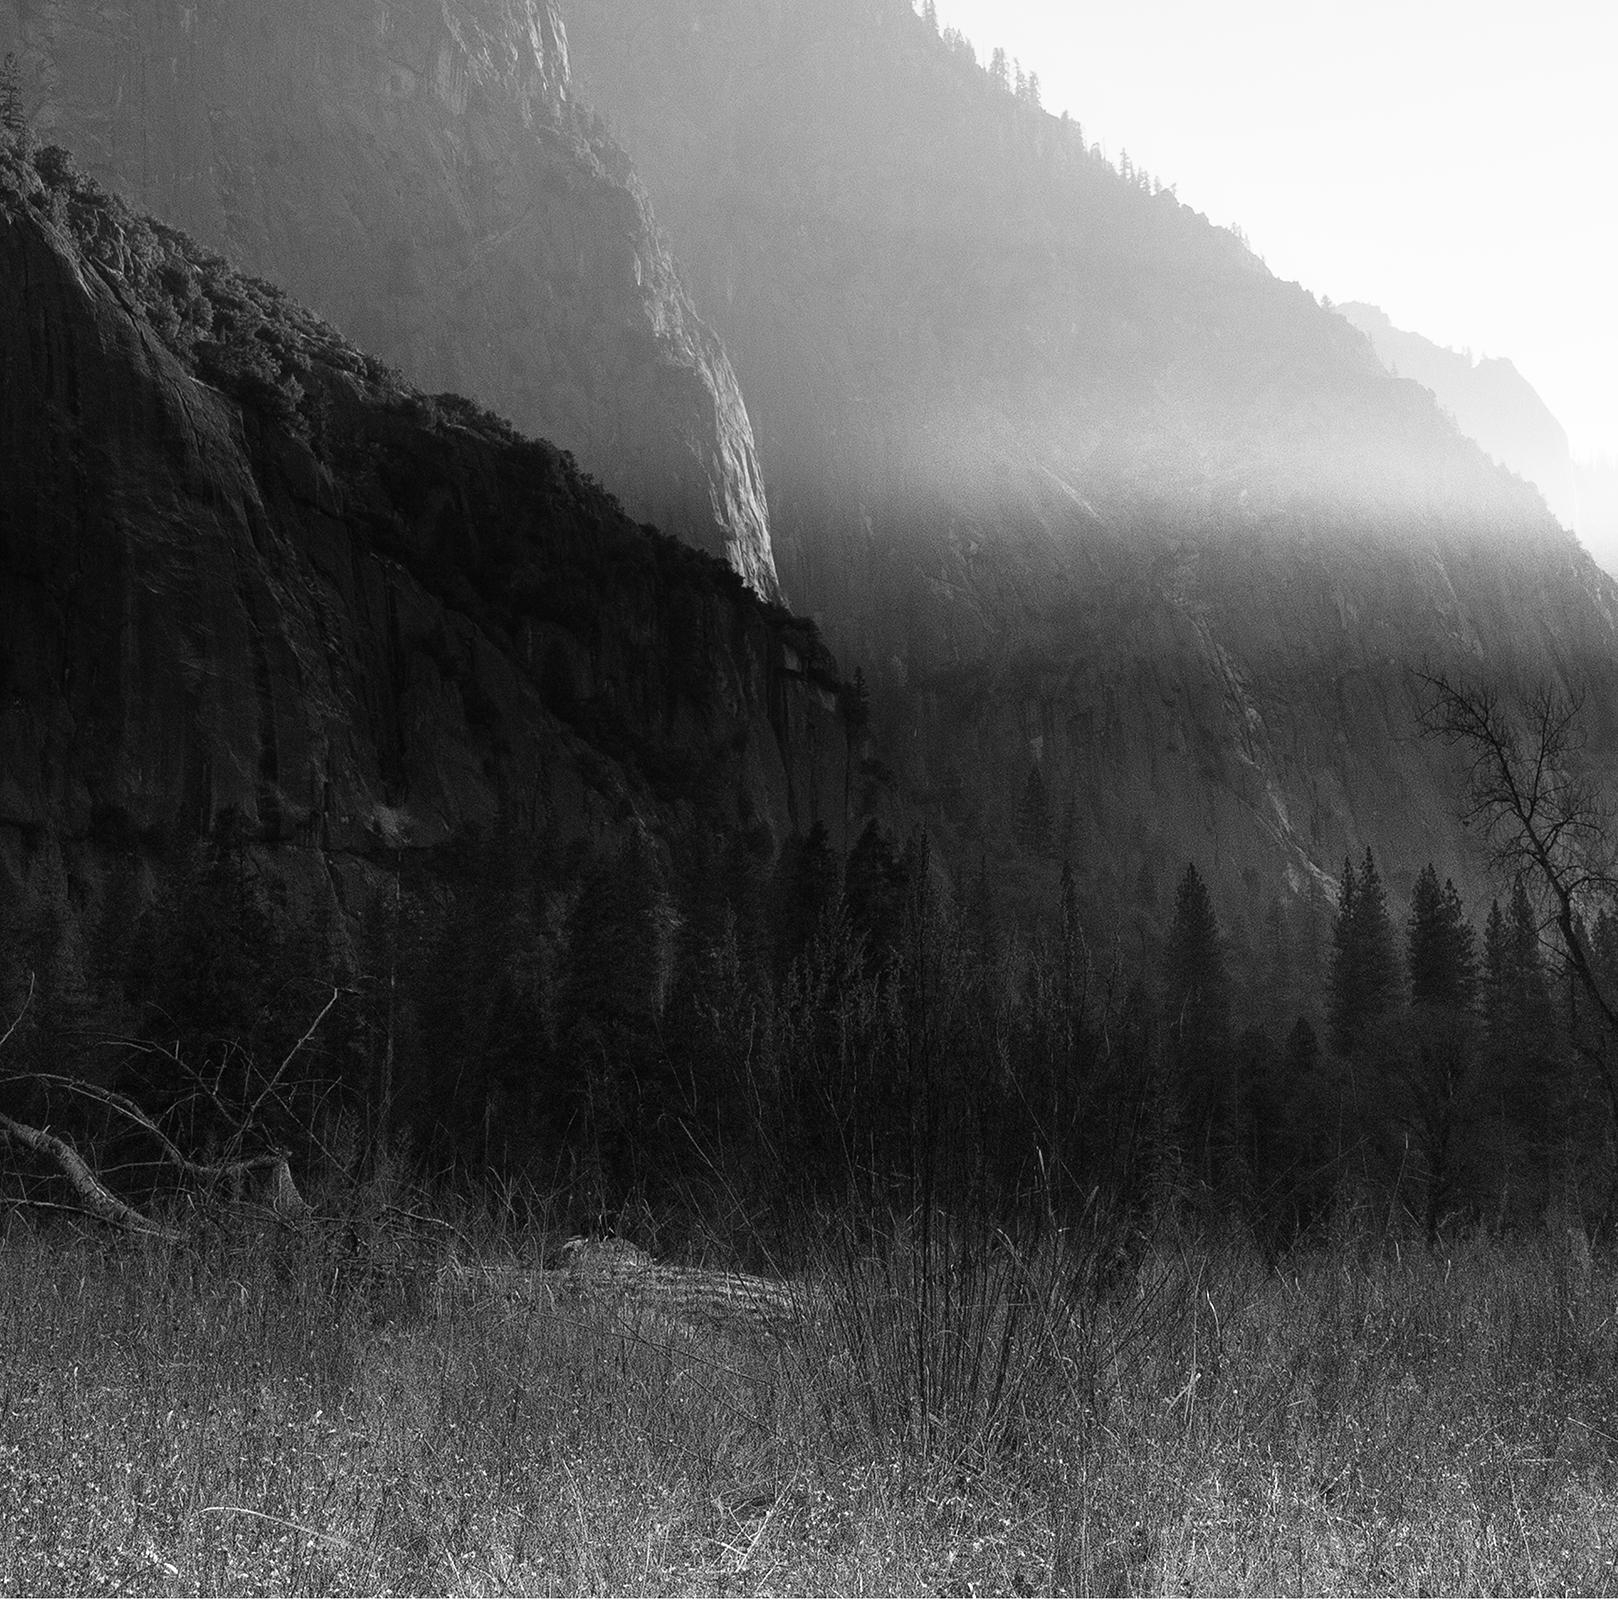 'Last Light' 
Limited Edition (1 of 25) Archival Photograph. Unframed.
_________________
Dusk throws on her spotlights, casting deep silhouettes and revealing rich layers in the vast beauty of Yosemite Valley. 
Sophia's poetic photographs are an